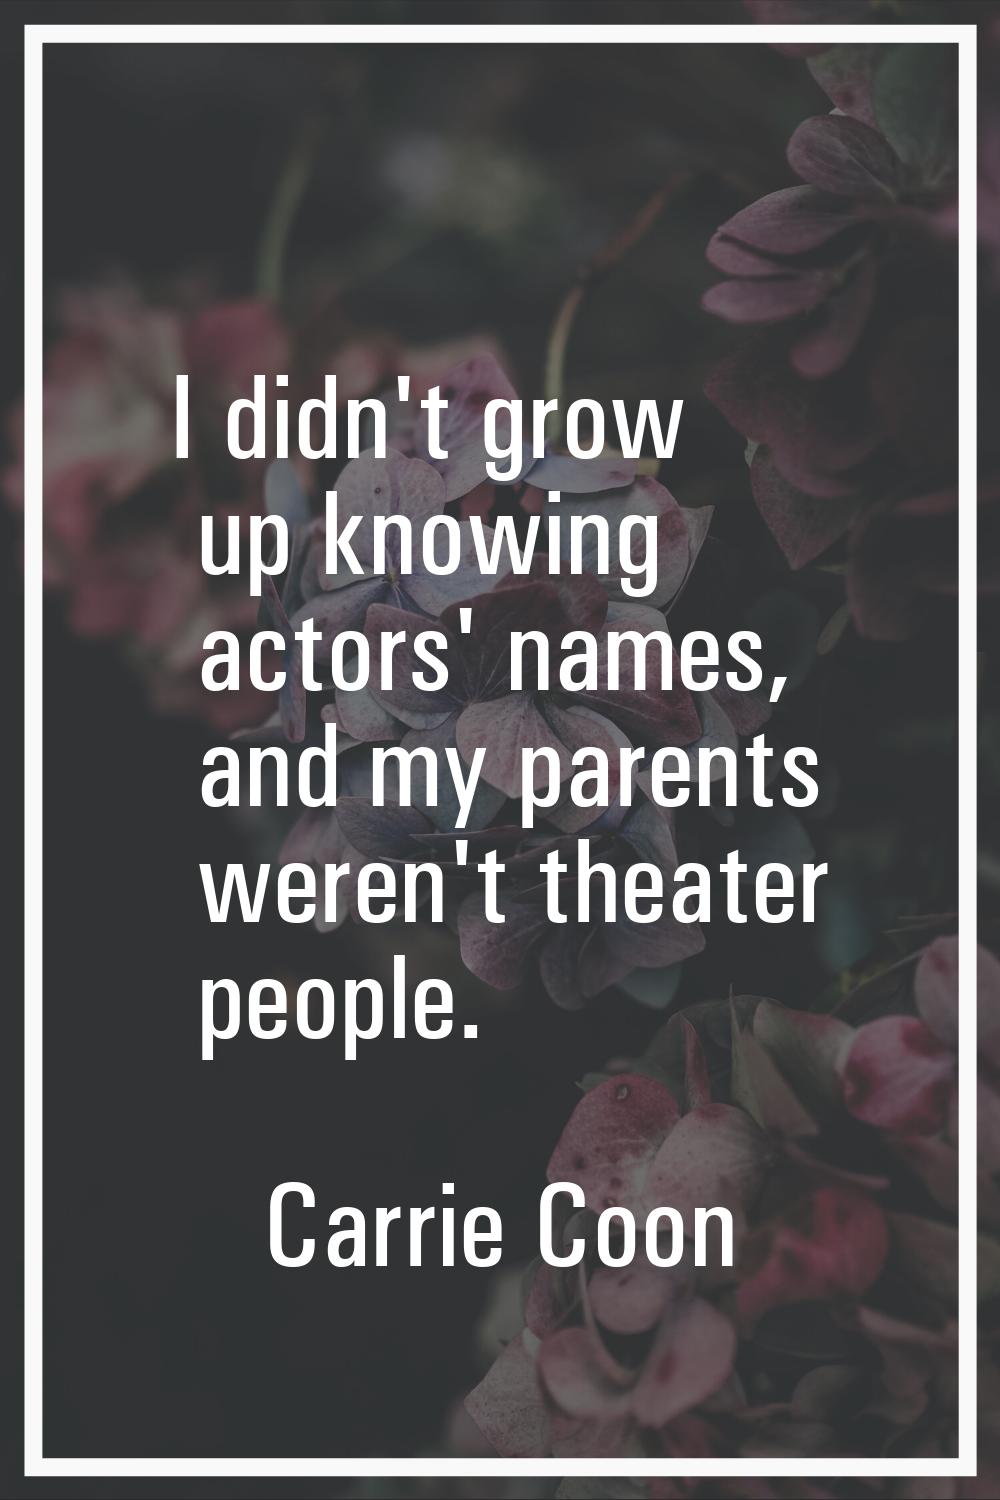 I didn't grow up knowing actors' names, and my parents weren't theater people.